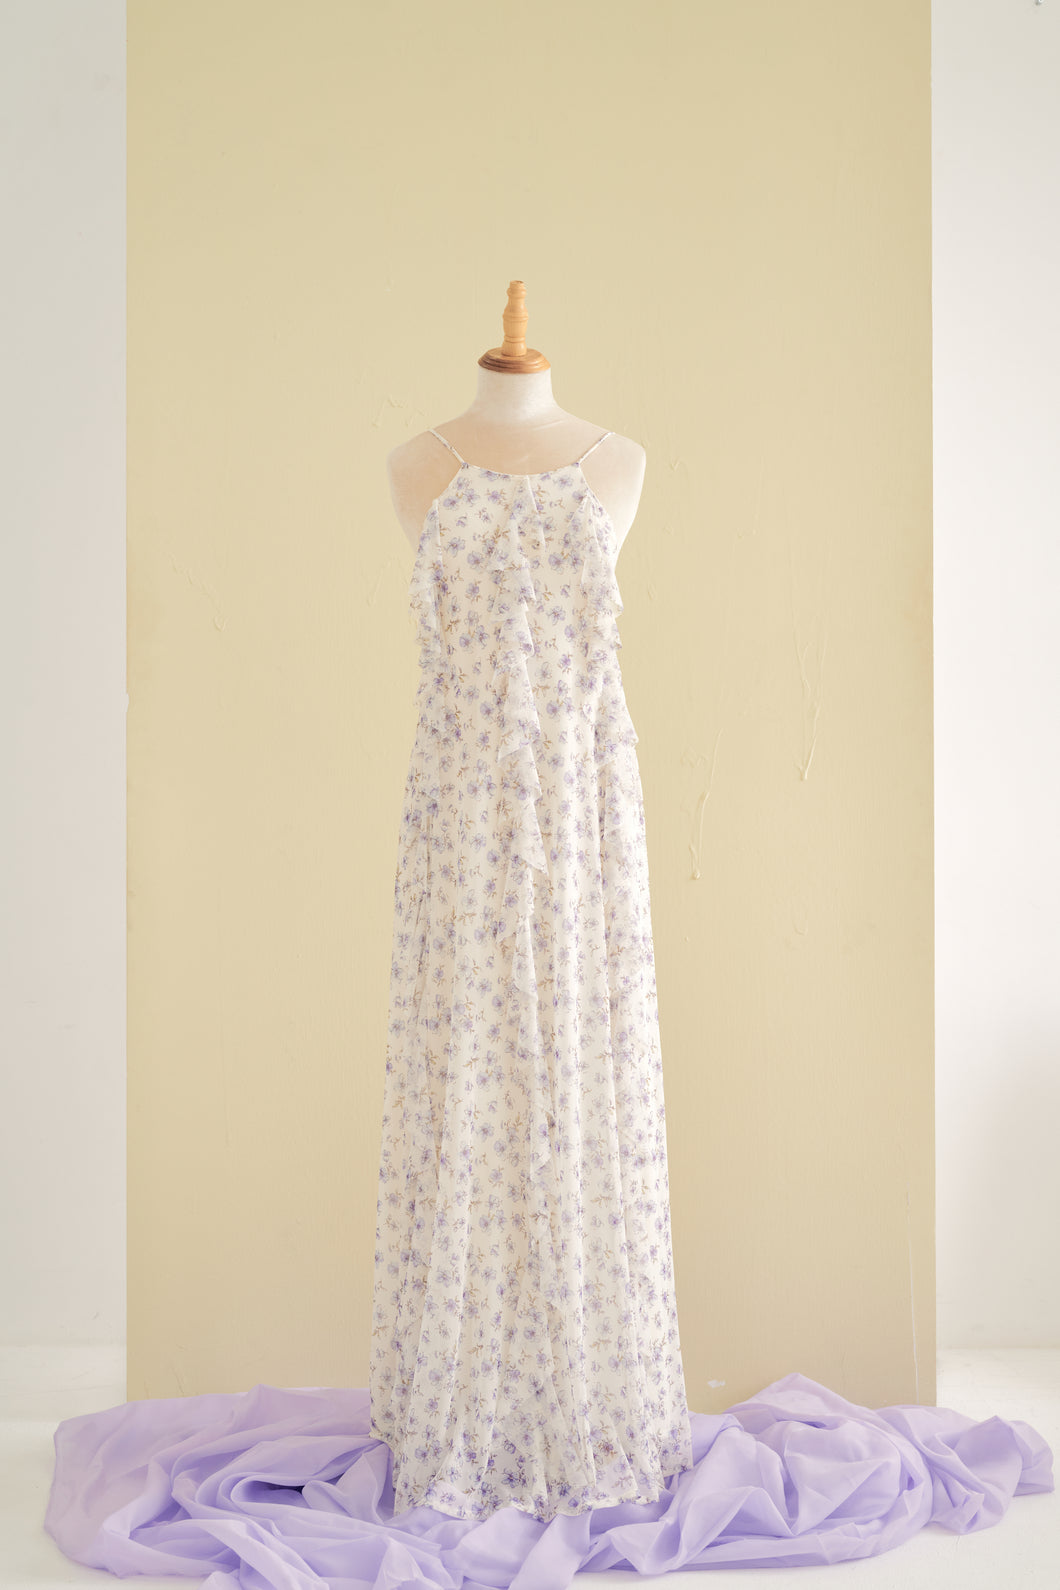 MERMAID DRESS (White-Summer 2022) Limited Edition